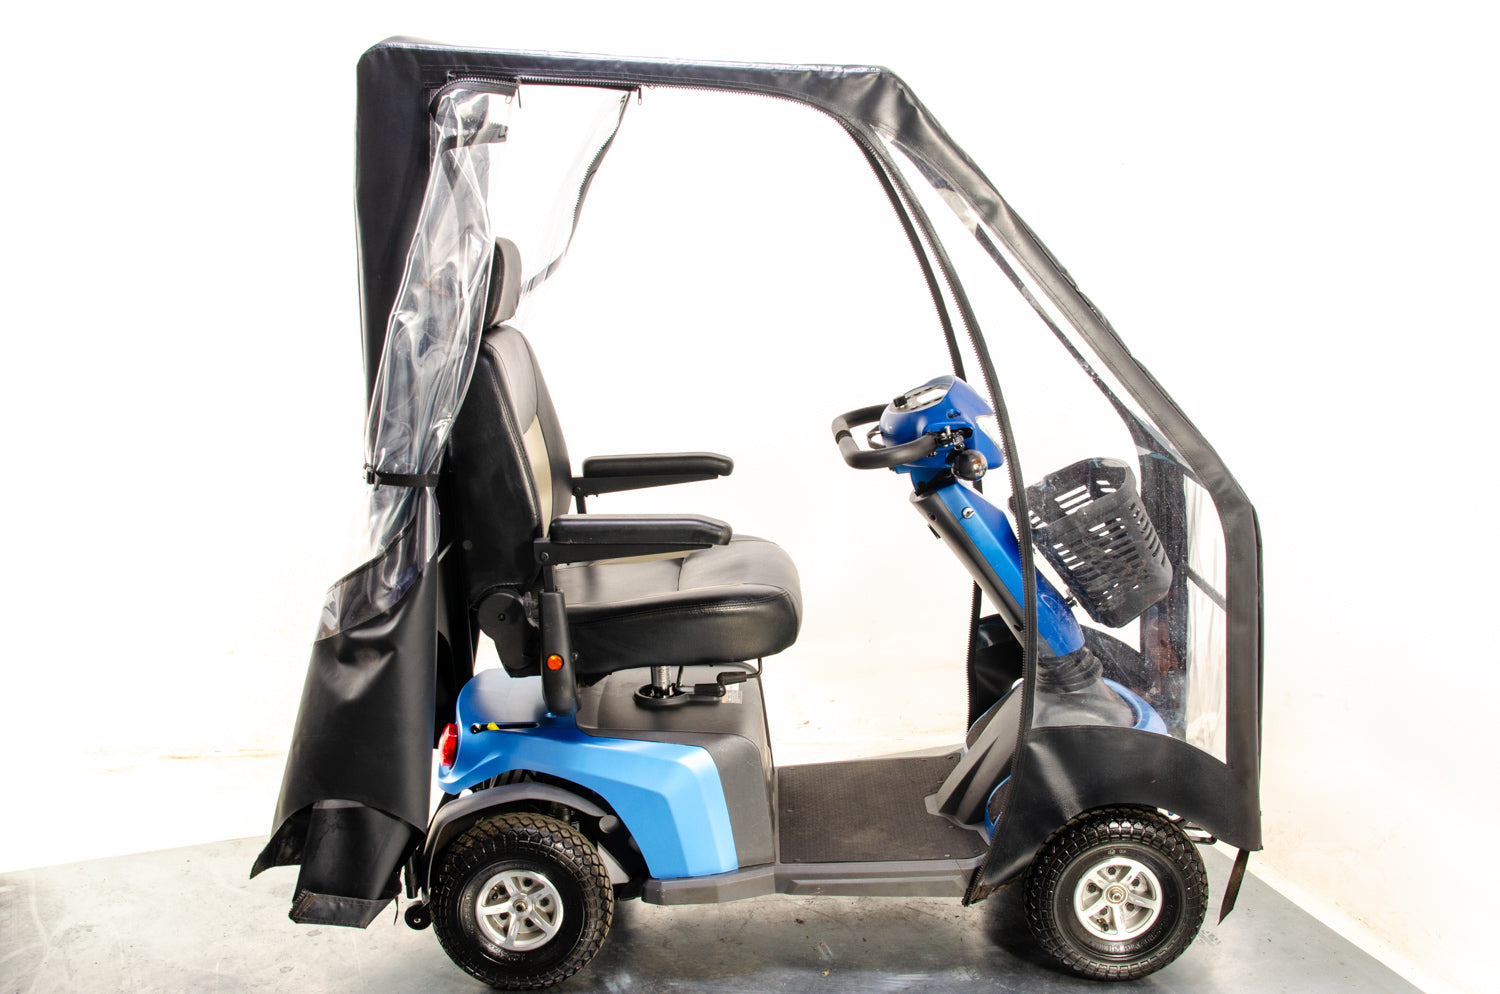 Excel Galaxy II All-Terrain Off-Road Used Mobility Scooter Canopy 8mph Van Os Large Comfy Class 3 Road Legal 13975